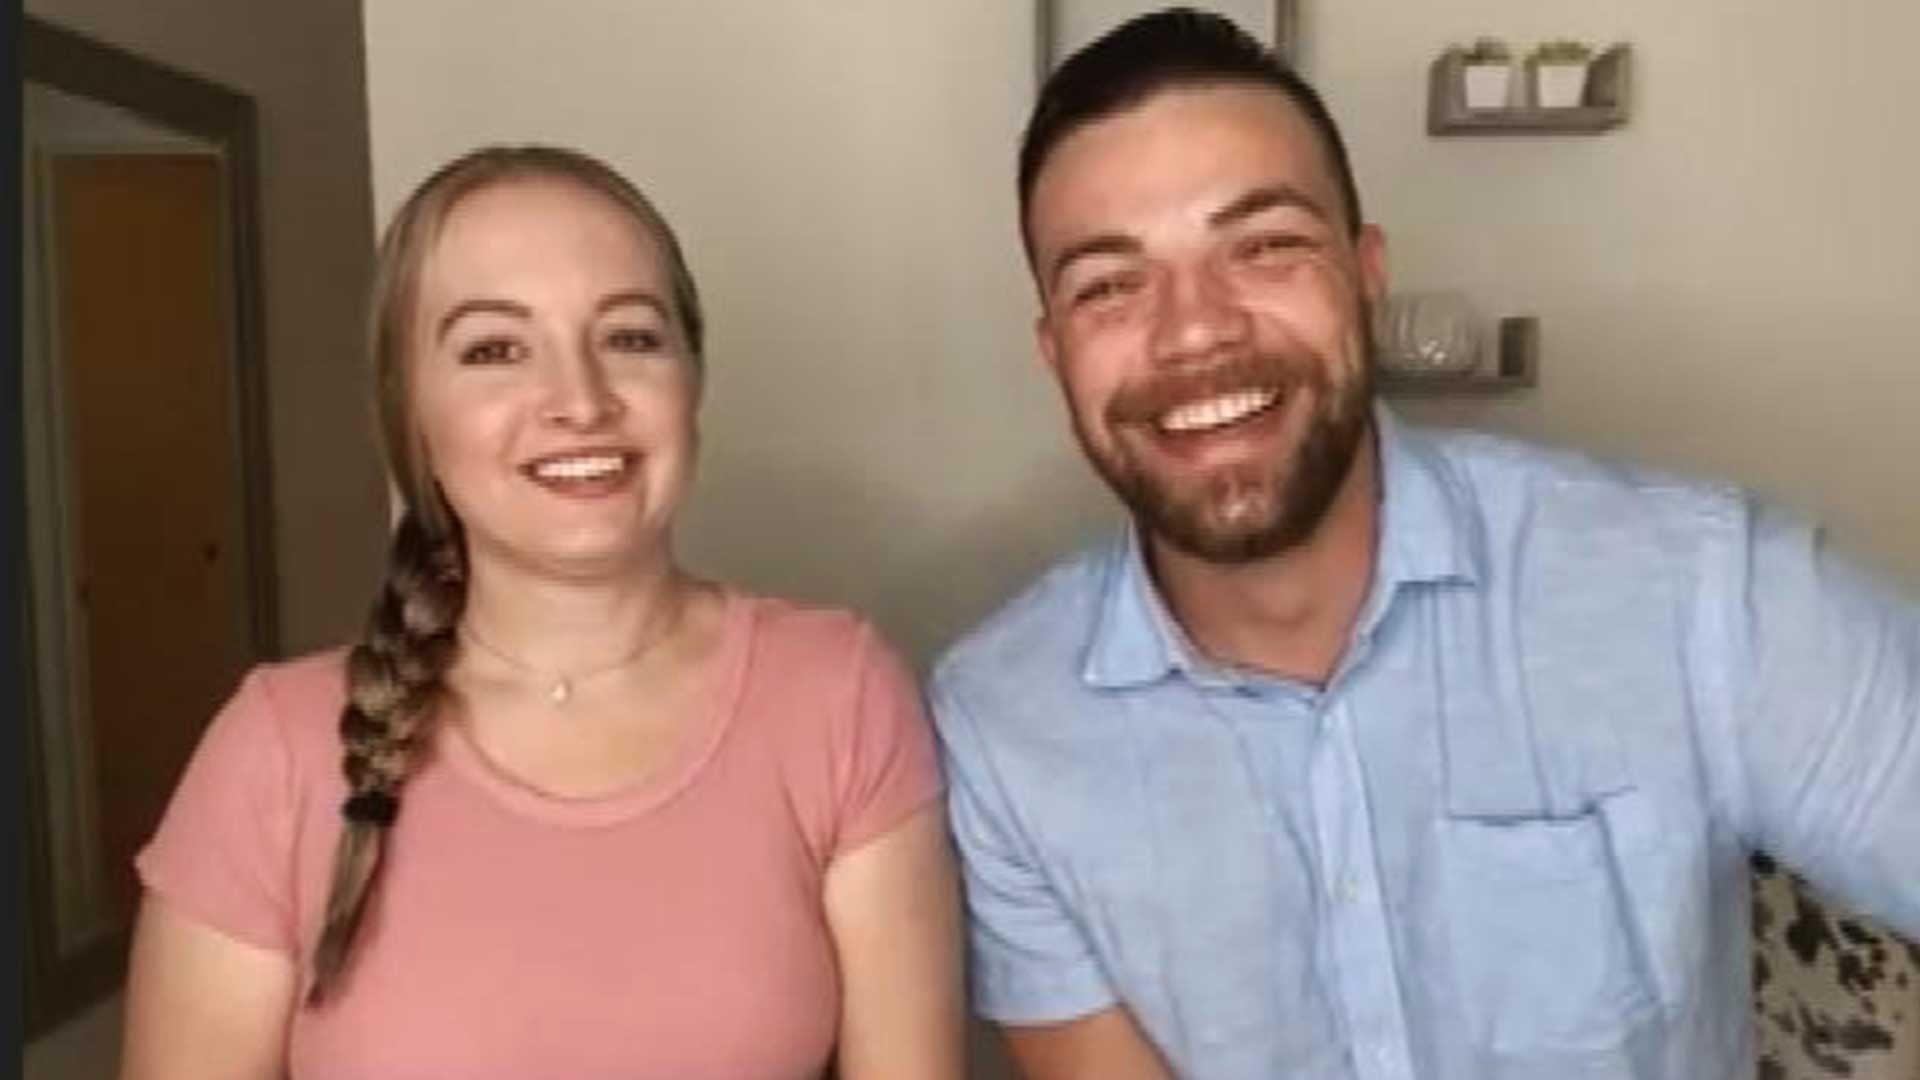 Details on the Three New '90 Day Fiance' Shows Coming to Discovery+